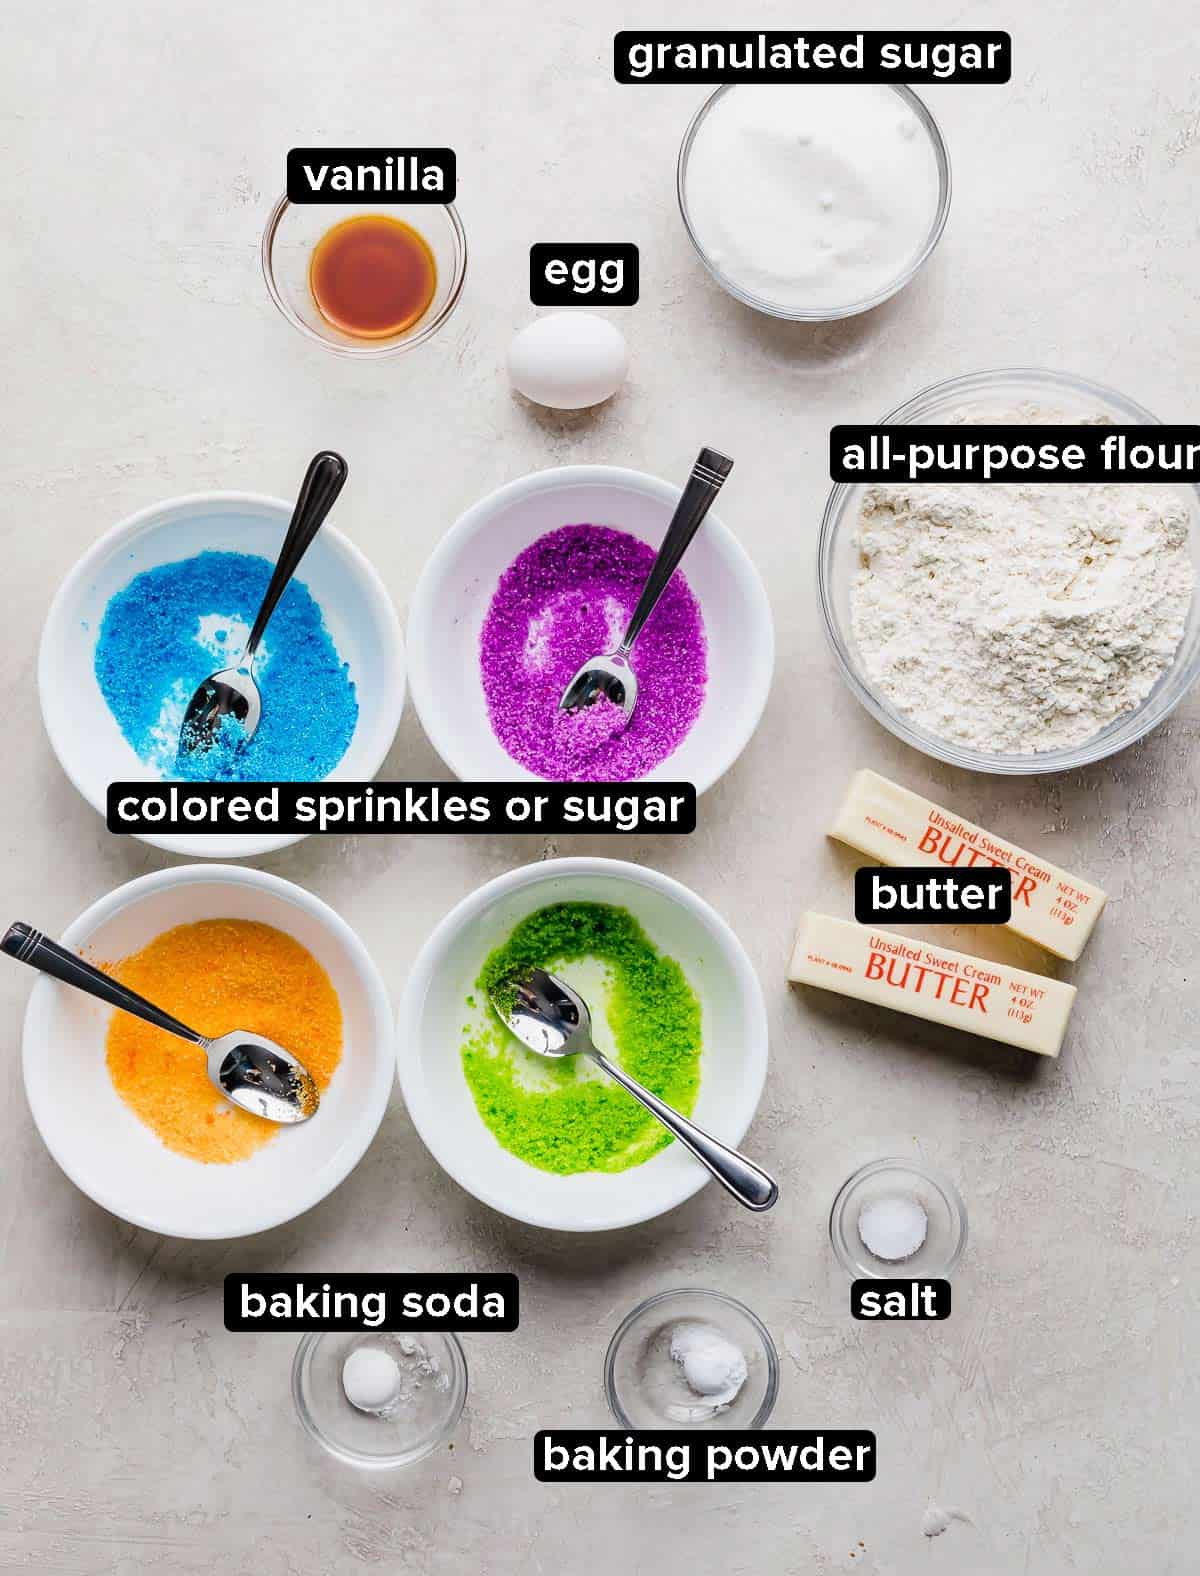 Ingredients used to make sugar coated cookies on a light gray background.